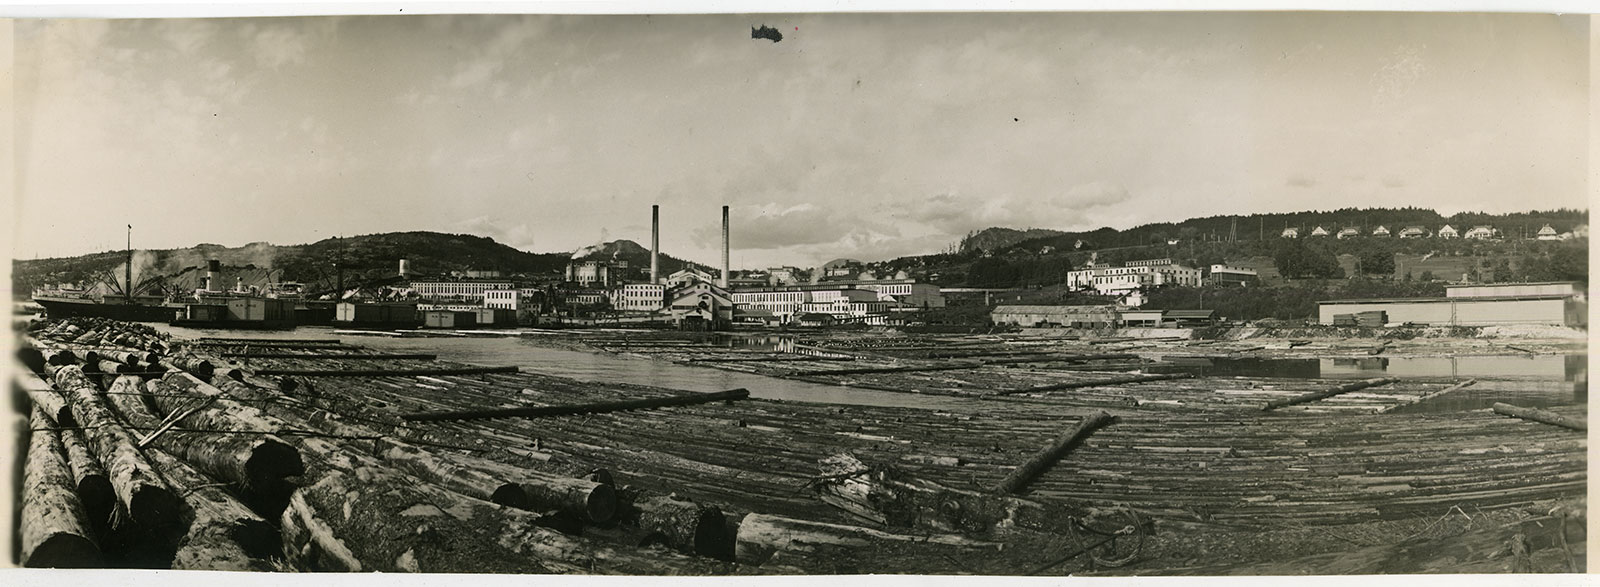 Log booms in the water in the foreground; in the background, the newsprint mill and Townsite.